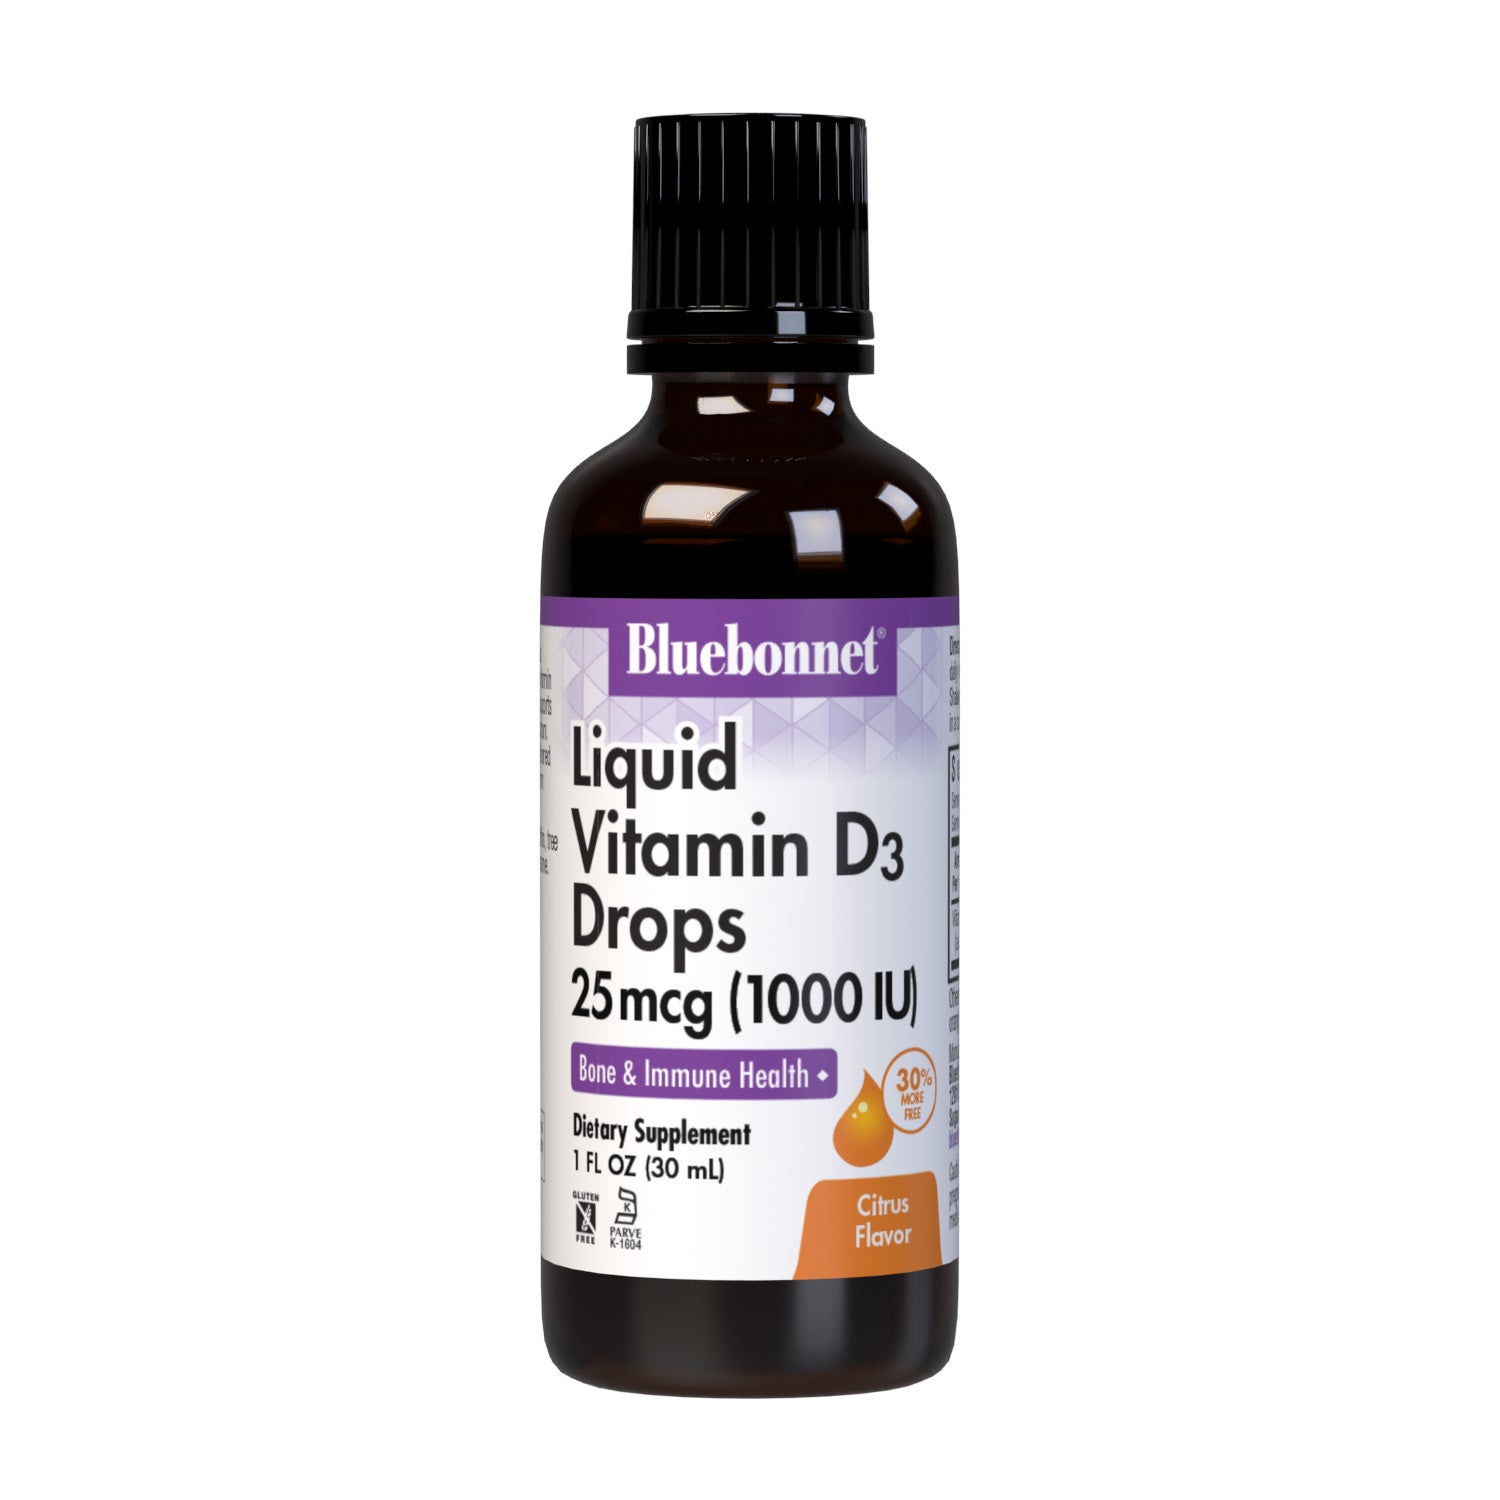 Bluebonnet’s Liquid Vitamin D3 Drops 1000 IU (25 mcg) are formulated with vitamin D3 (cholecalciferol) from lanolin for strong healthy bones. Each drop of this sunshine vitamin is flavored using a hint of orange and lemon essential oils. #size_1 fl oz